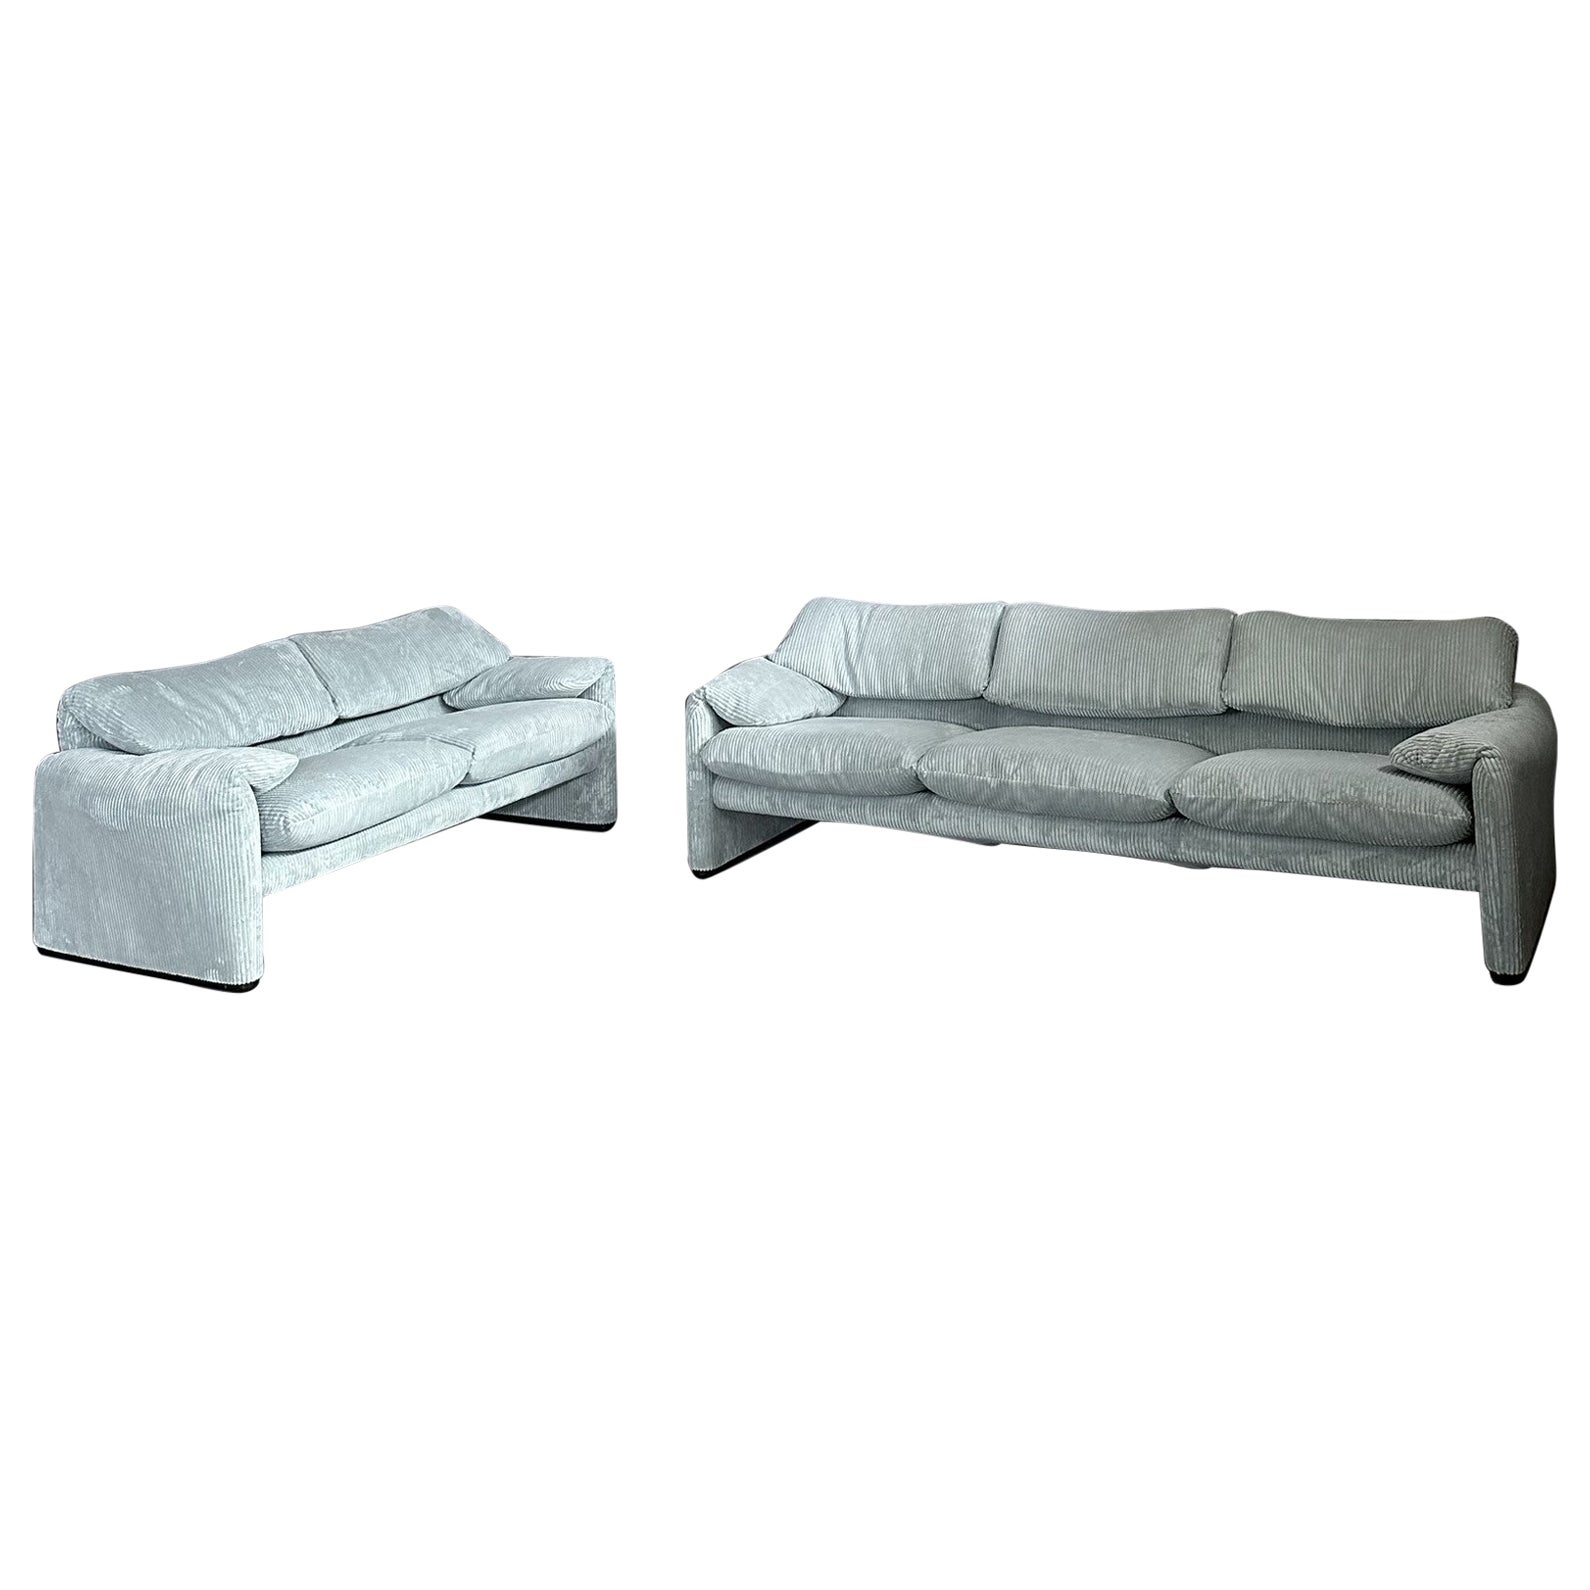 Pair of Maralunga sofas design by Vico Magistretti for Cassina 2seater - 3seater For Sale